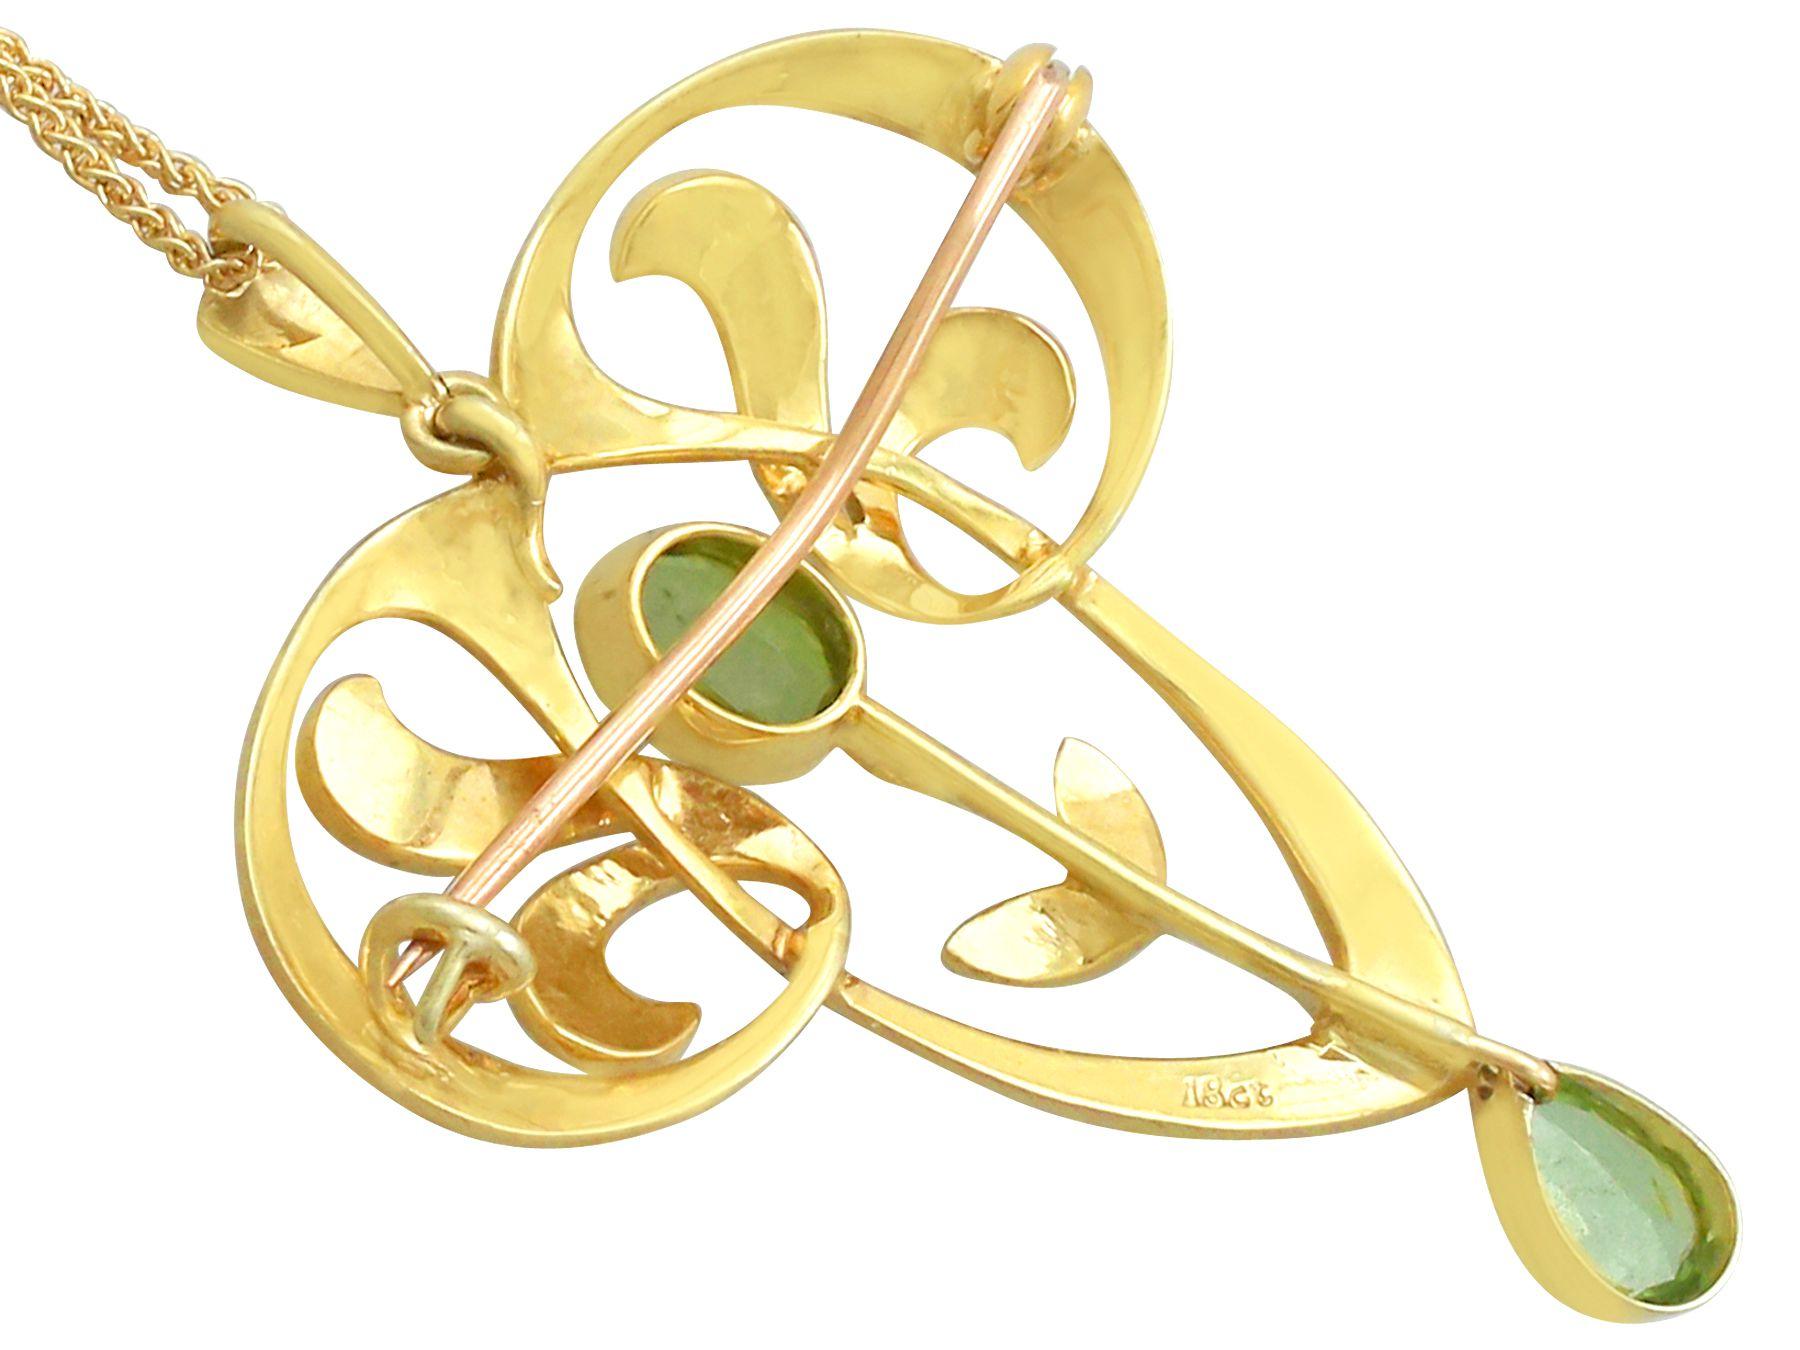 Oval Cut Antique 1910s Art Nouveau Peridot and Seed Pearl Yellow Gold Pendant / Brooch For Sale